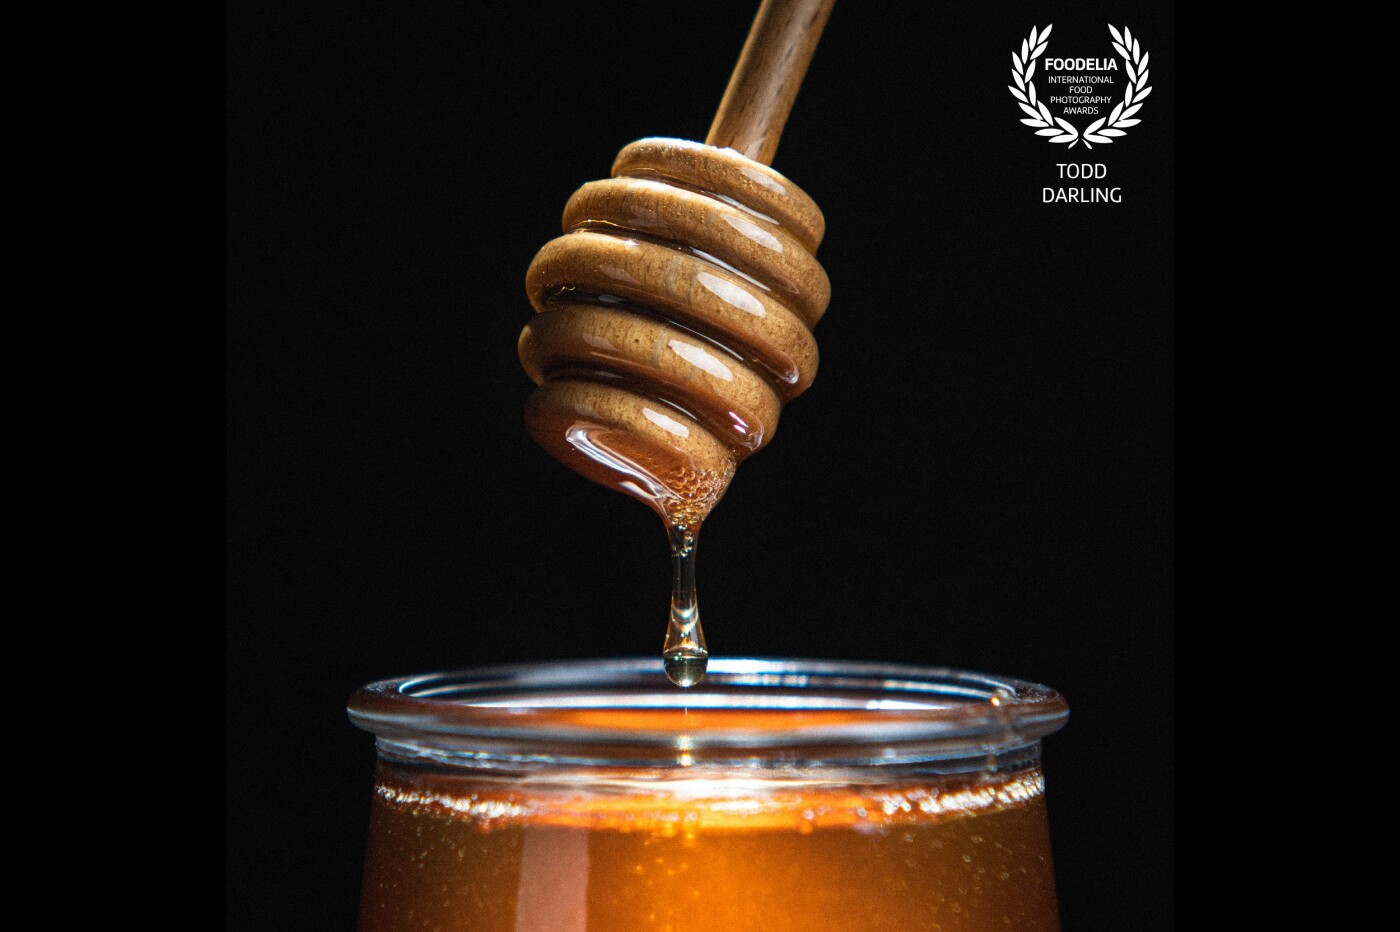 This was a study in lighting. I really wanted the honey to glow and feel rich and delicious. It took a few shots to catch the perfect drip of honey, and I really love how it came out. I love the highlights on the dipper and the rich golden color in the honey.